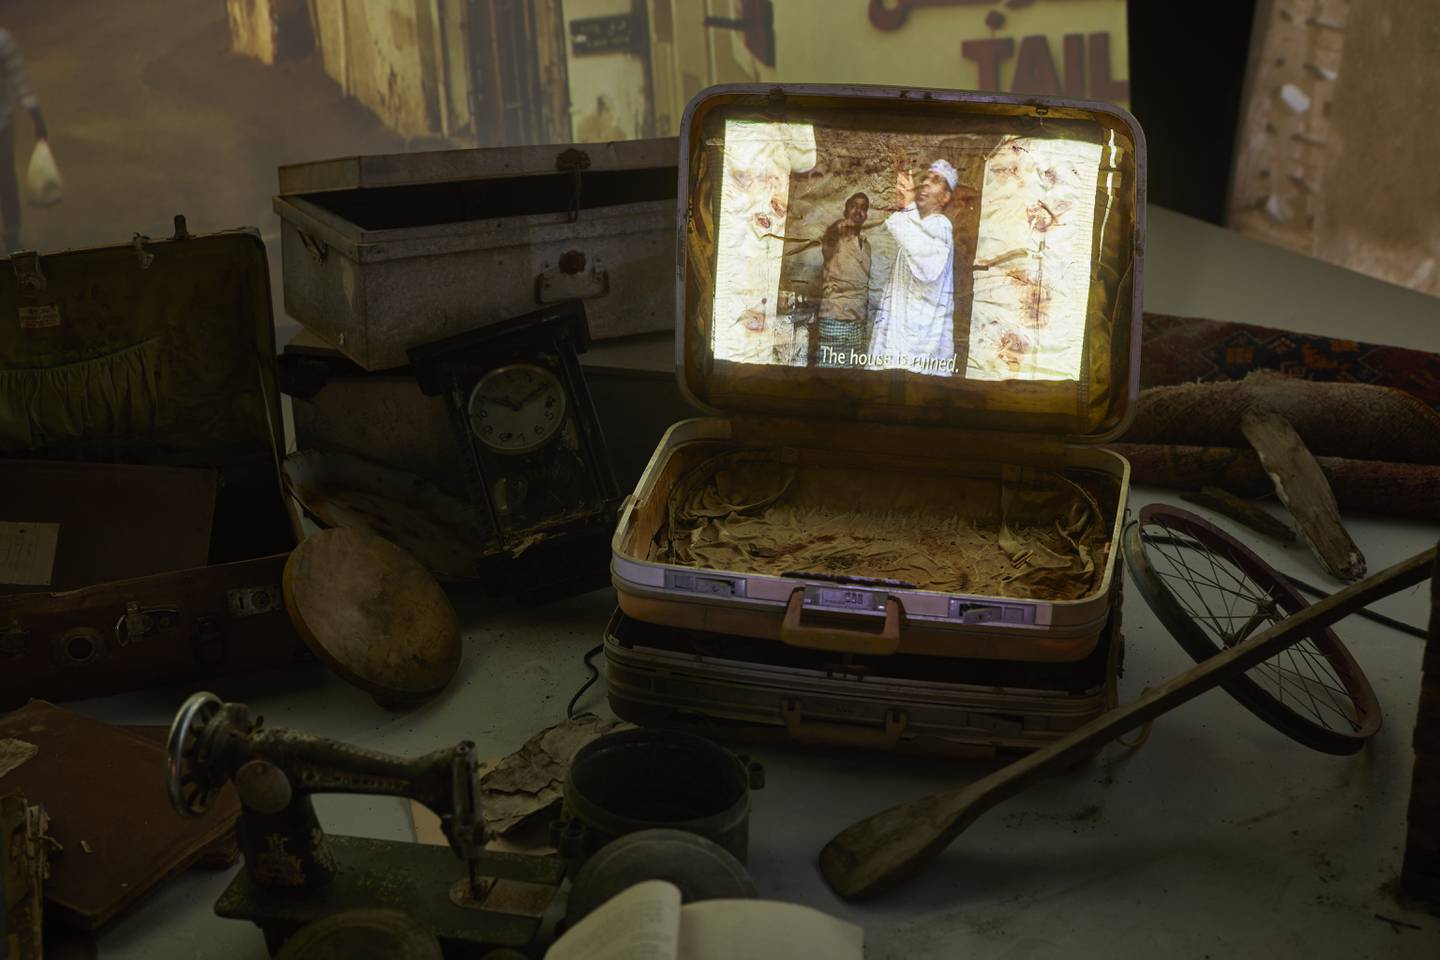 Hassan Meer's 'Reflection from Memories' comprises old personal objects. Photo: David Levene